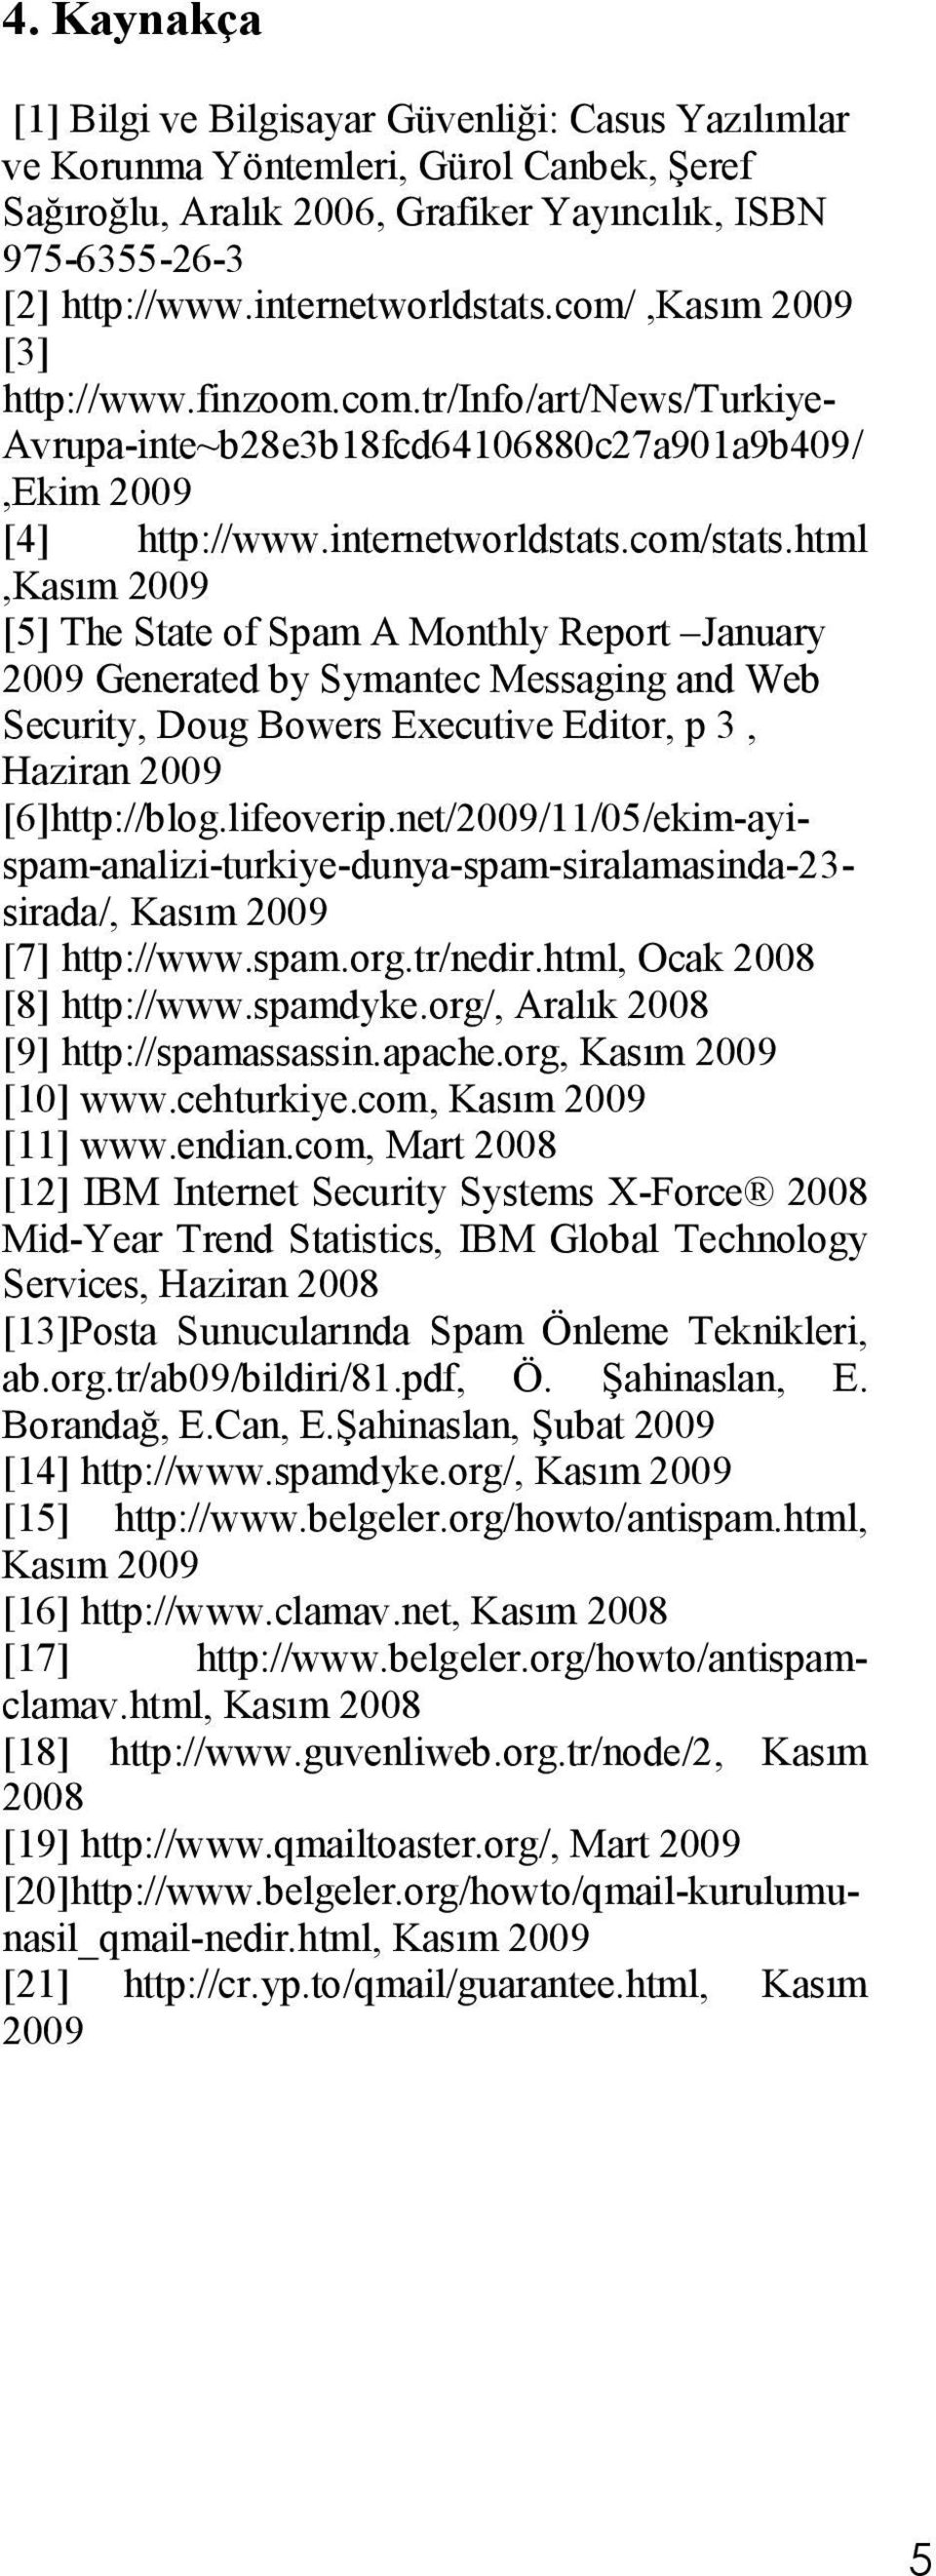 html,kasım 2009 [5] The State of Spam A Monthly Report January 2009 Generated by Symantec Messaging and Web Security, Doug Bowers Executive Editor, p 3, Haziran 2009 [6]http://blog.lifeoverip.